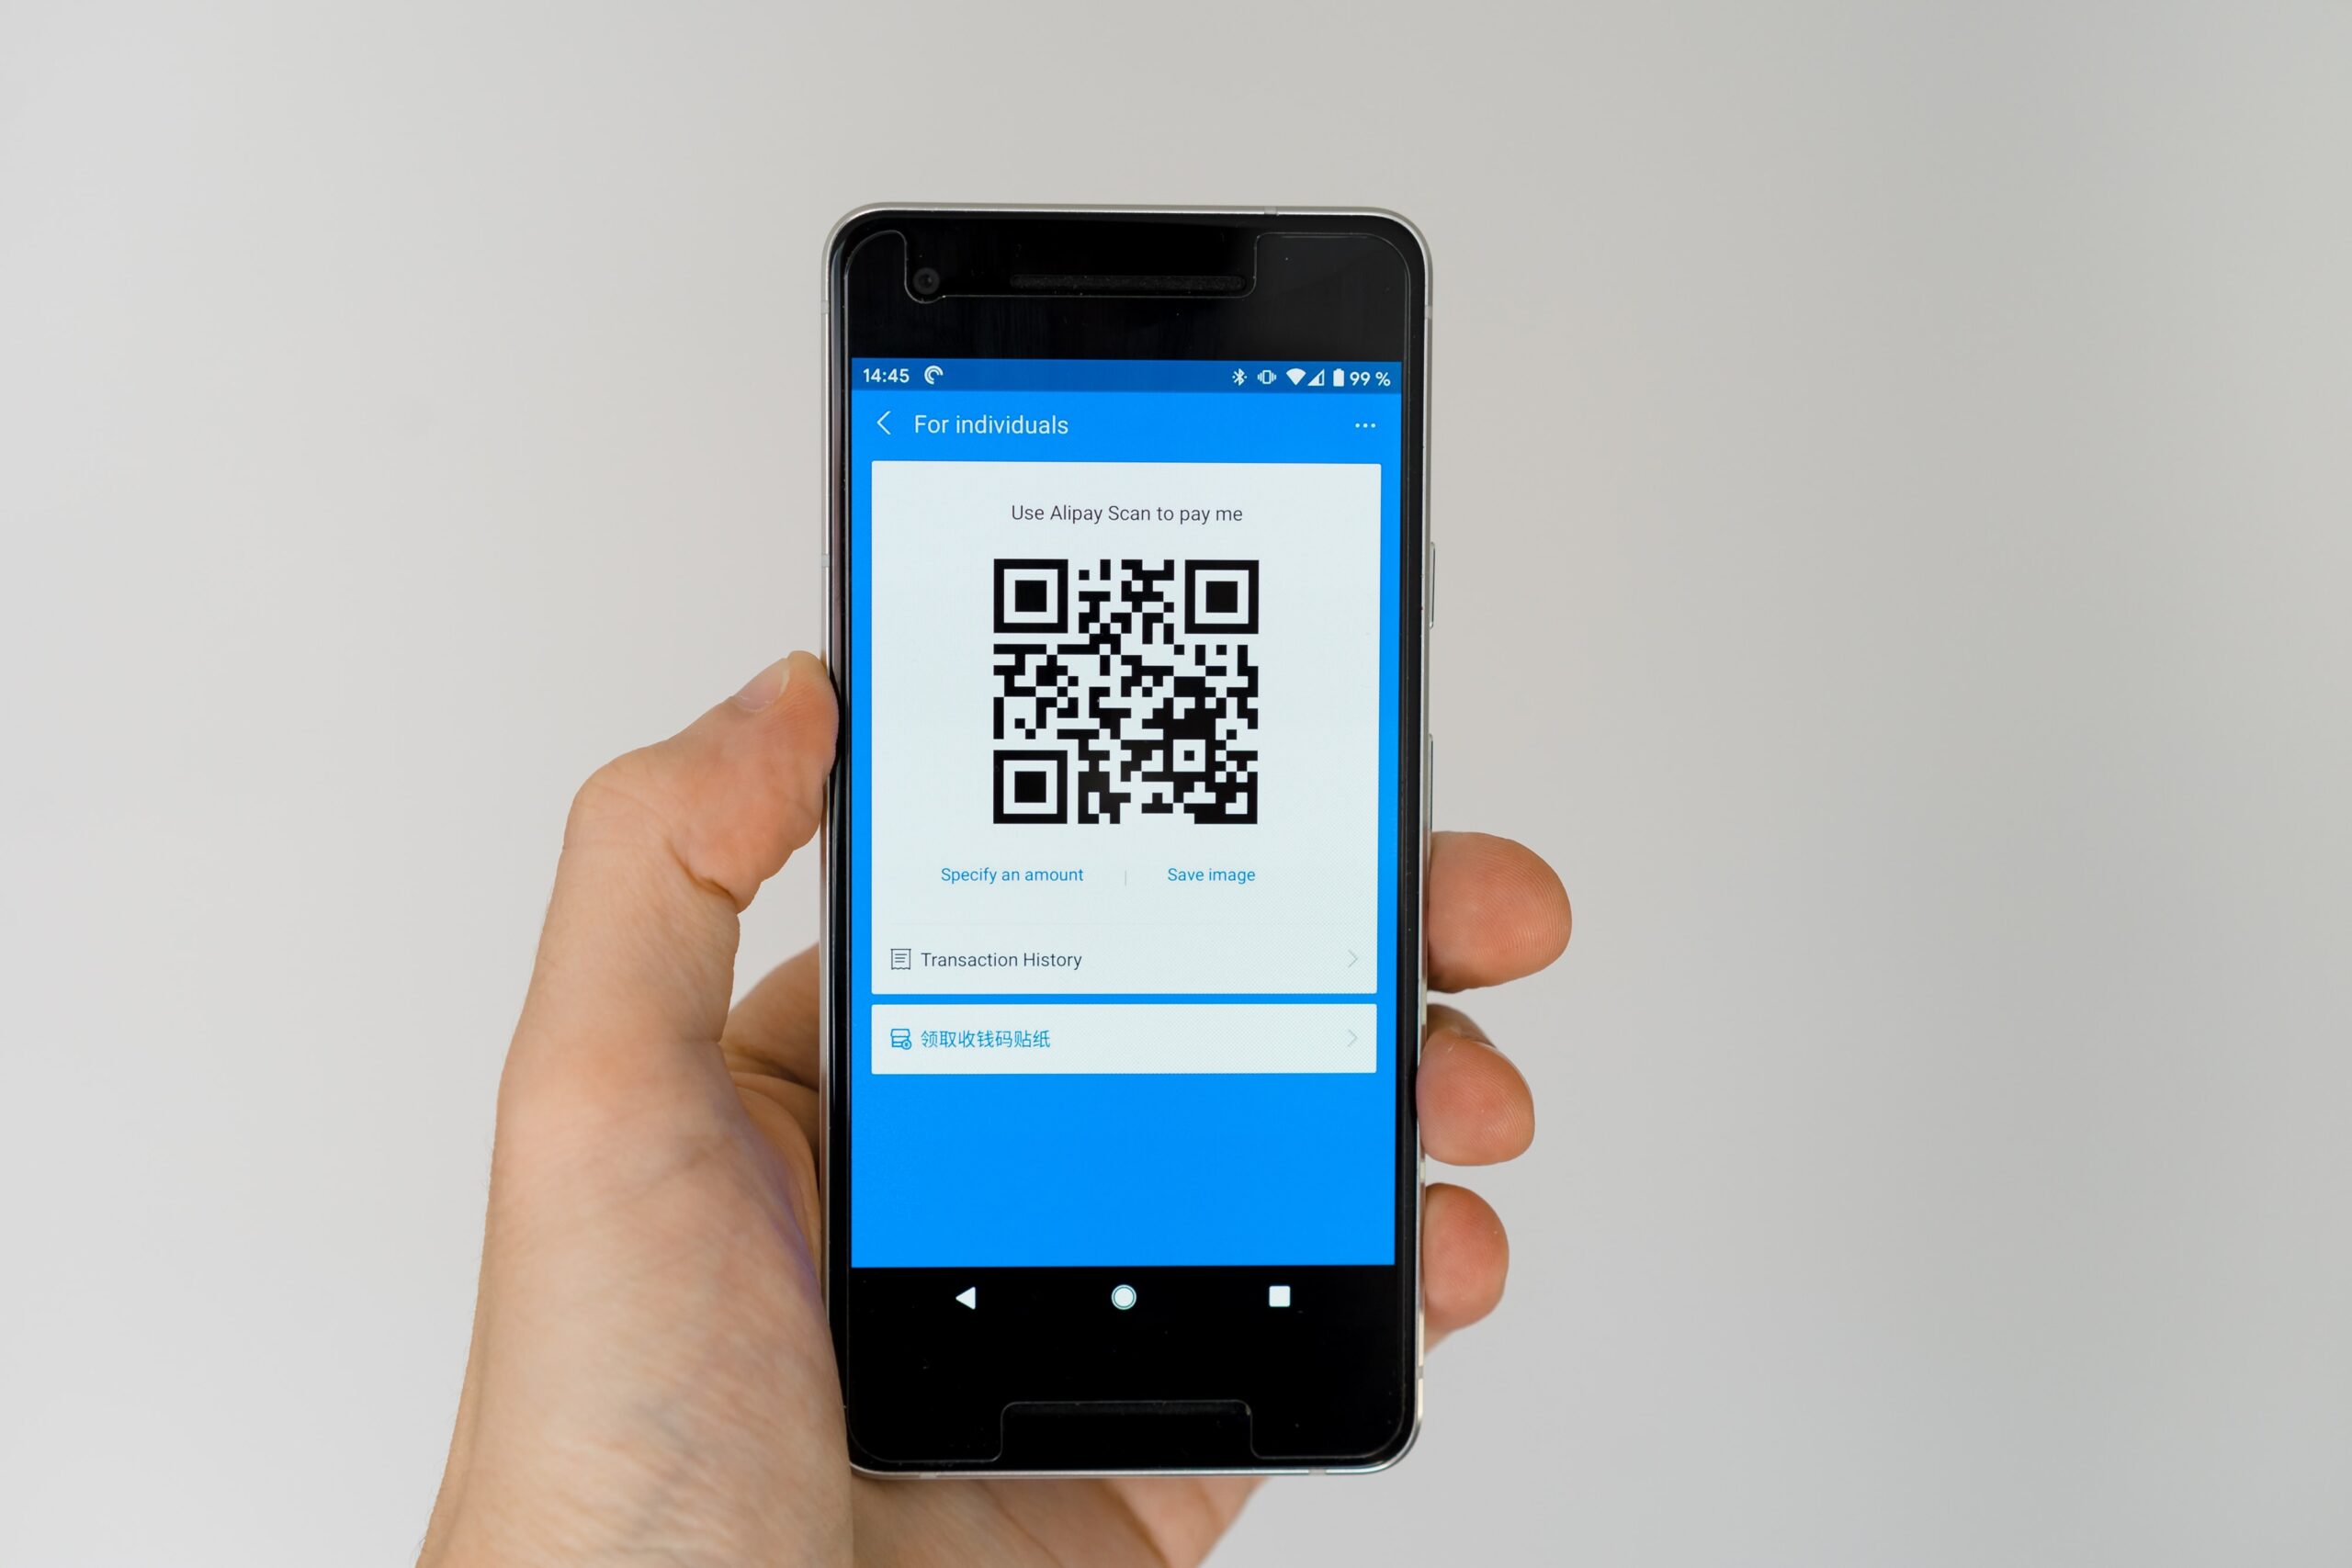 Static Vs Dynamic QR Codes: When to Use Either?